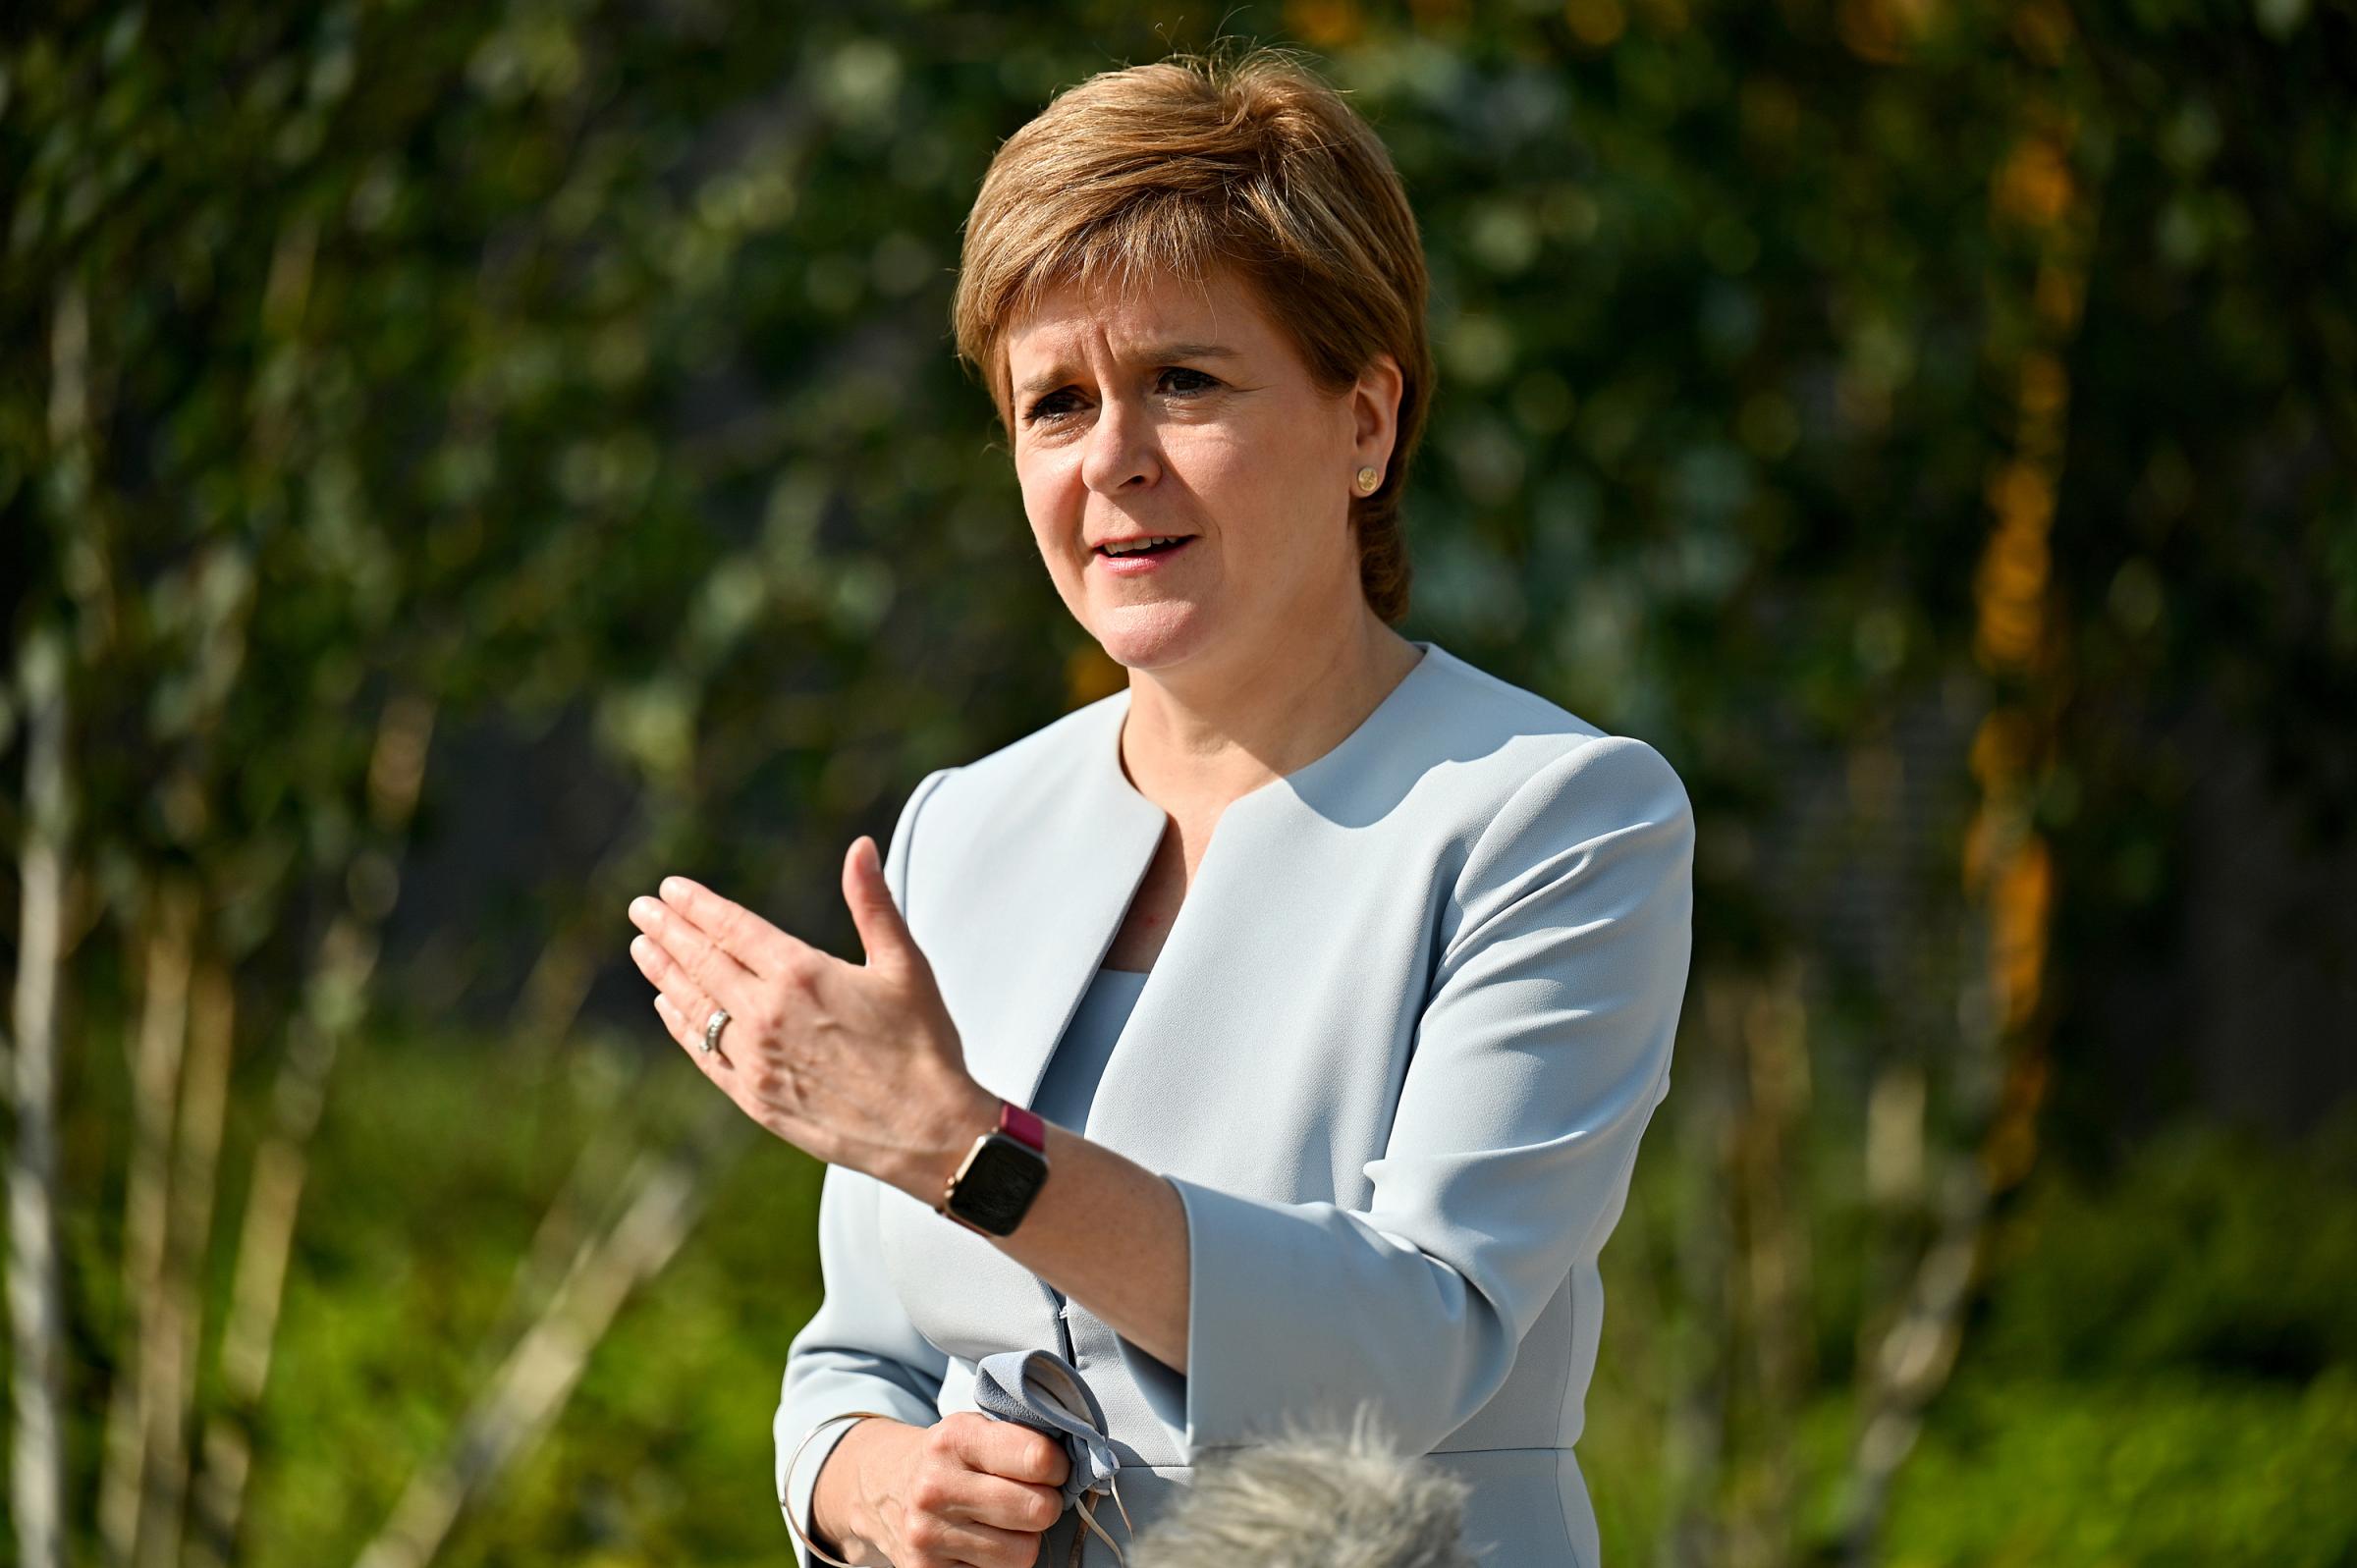 Nicola Sturgeon Covid announcement: What time is today's update?